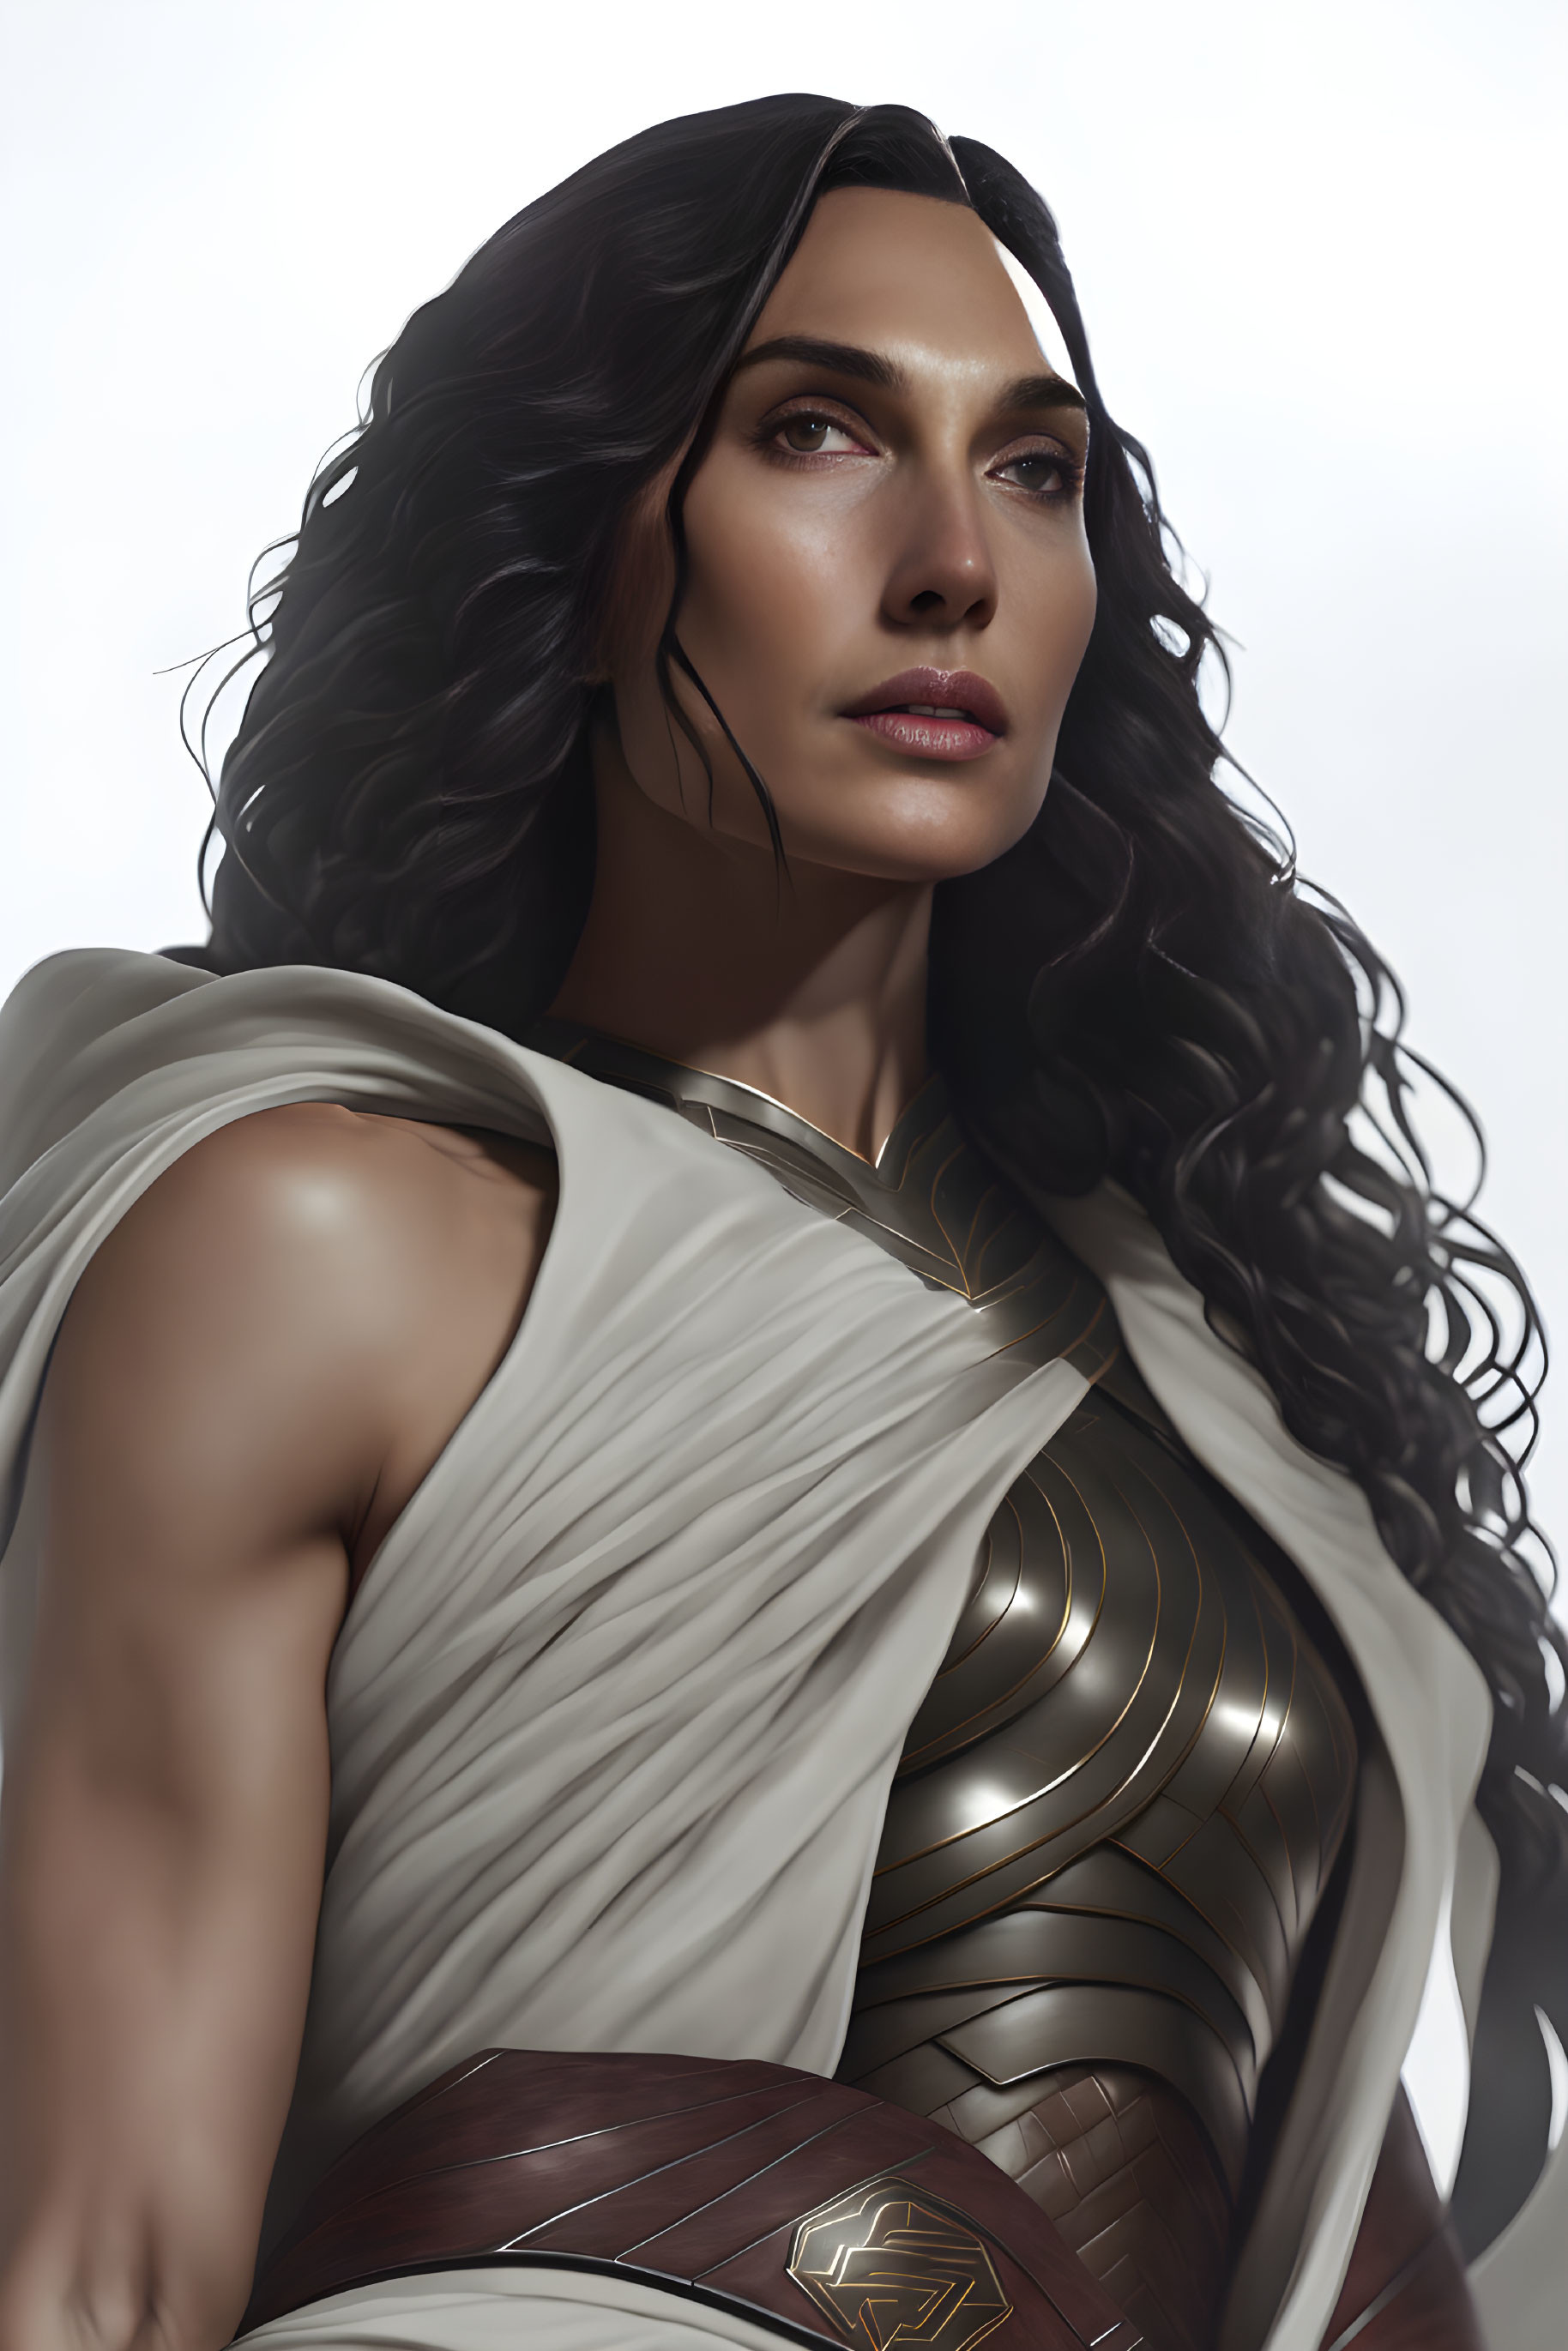 Long-haired woman in white and gold warrior attire gazing afar